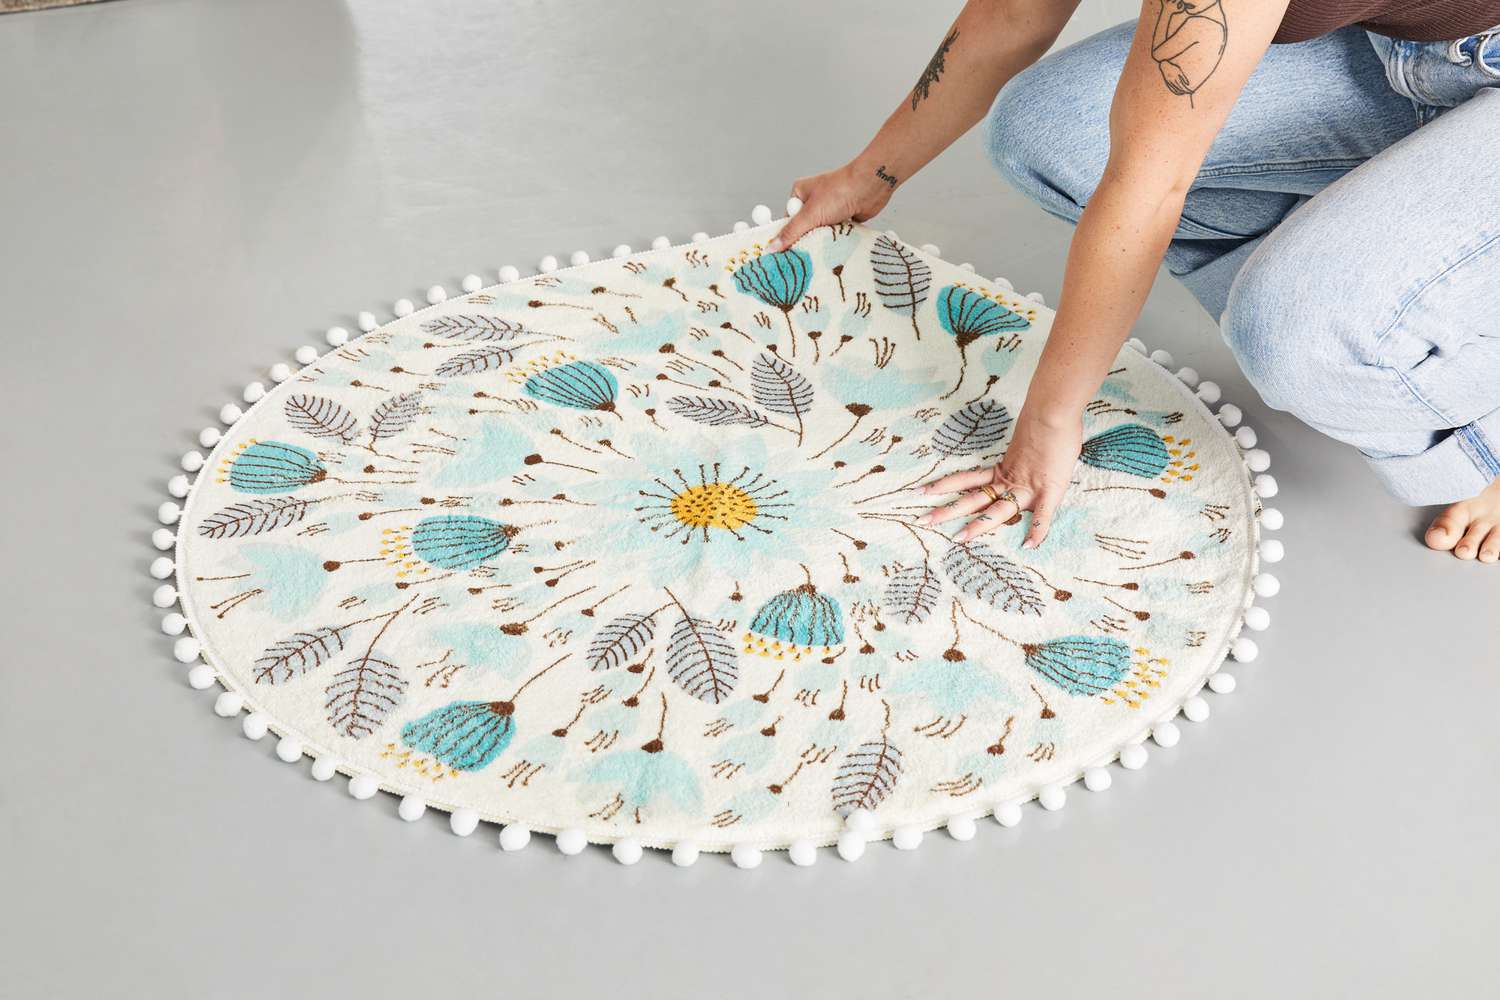 A person adjusting the Uphome Pom Pom Round Floral Rug on the floor